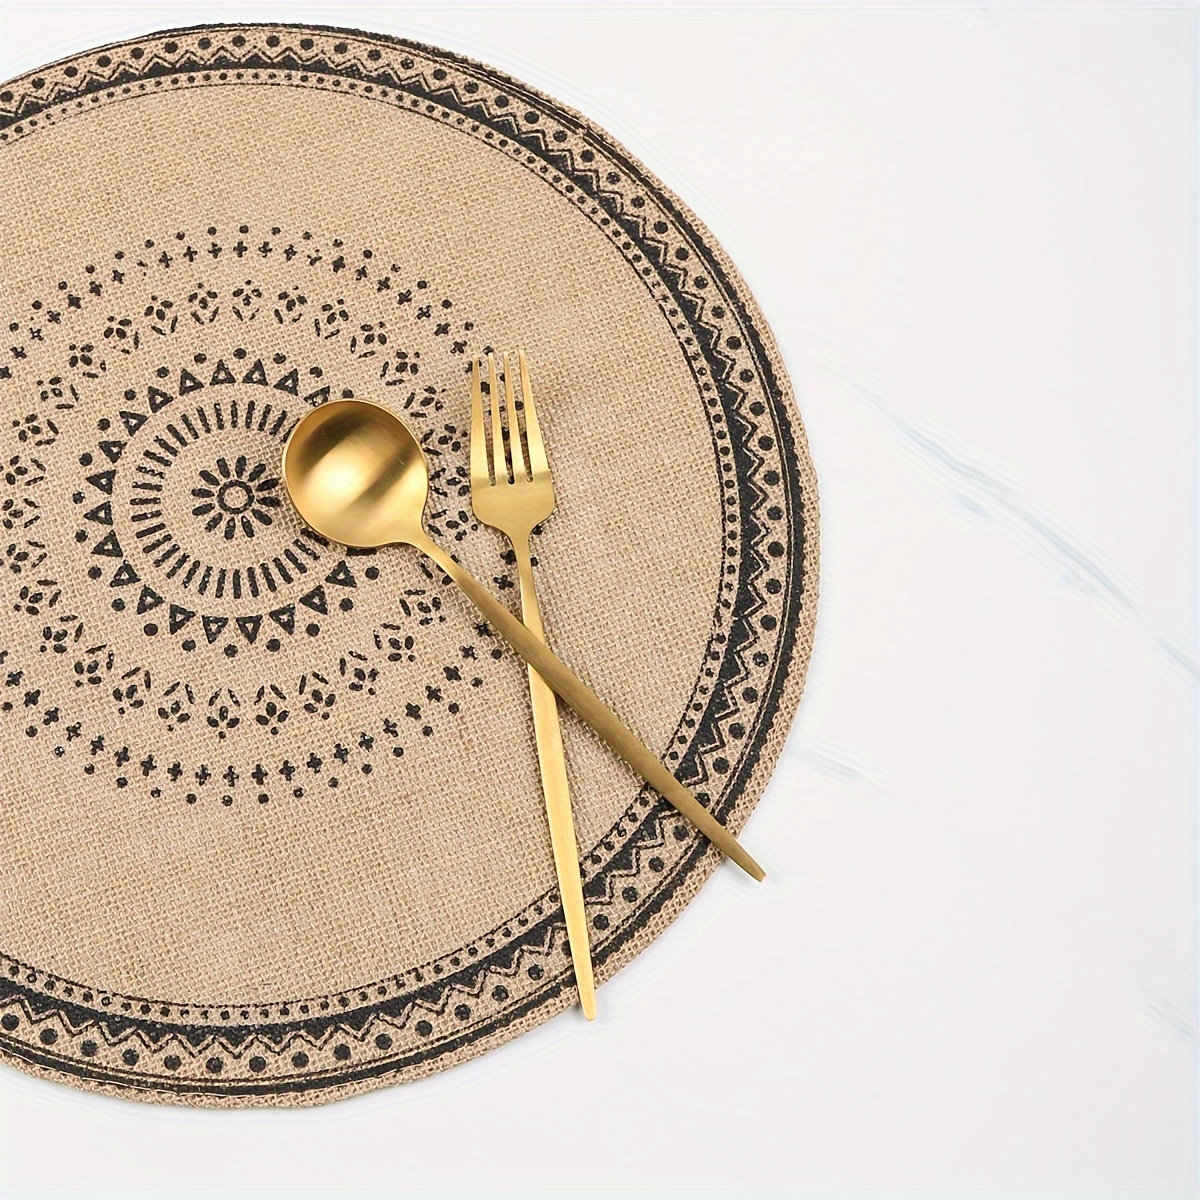 

Boho Chic 4-piece Round Jute Placemat Set With Tassels - Non-slip, Washable Table Mats For Dining & Decor